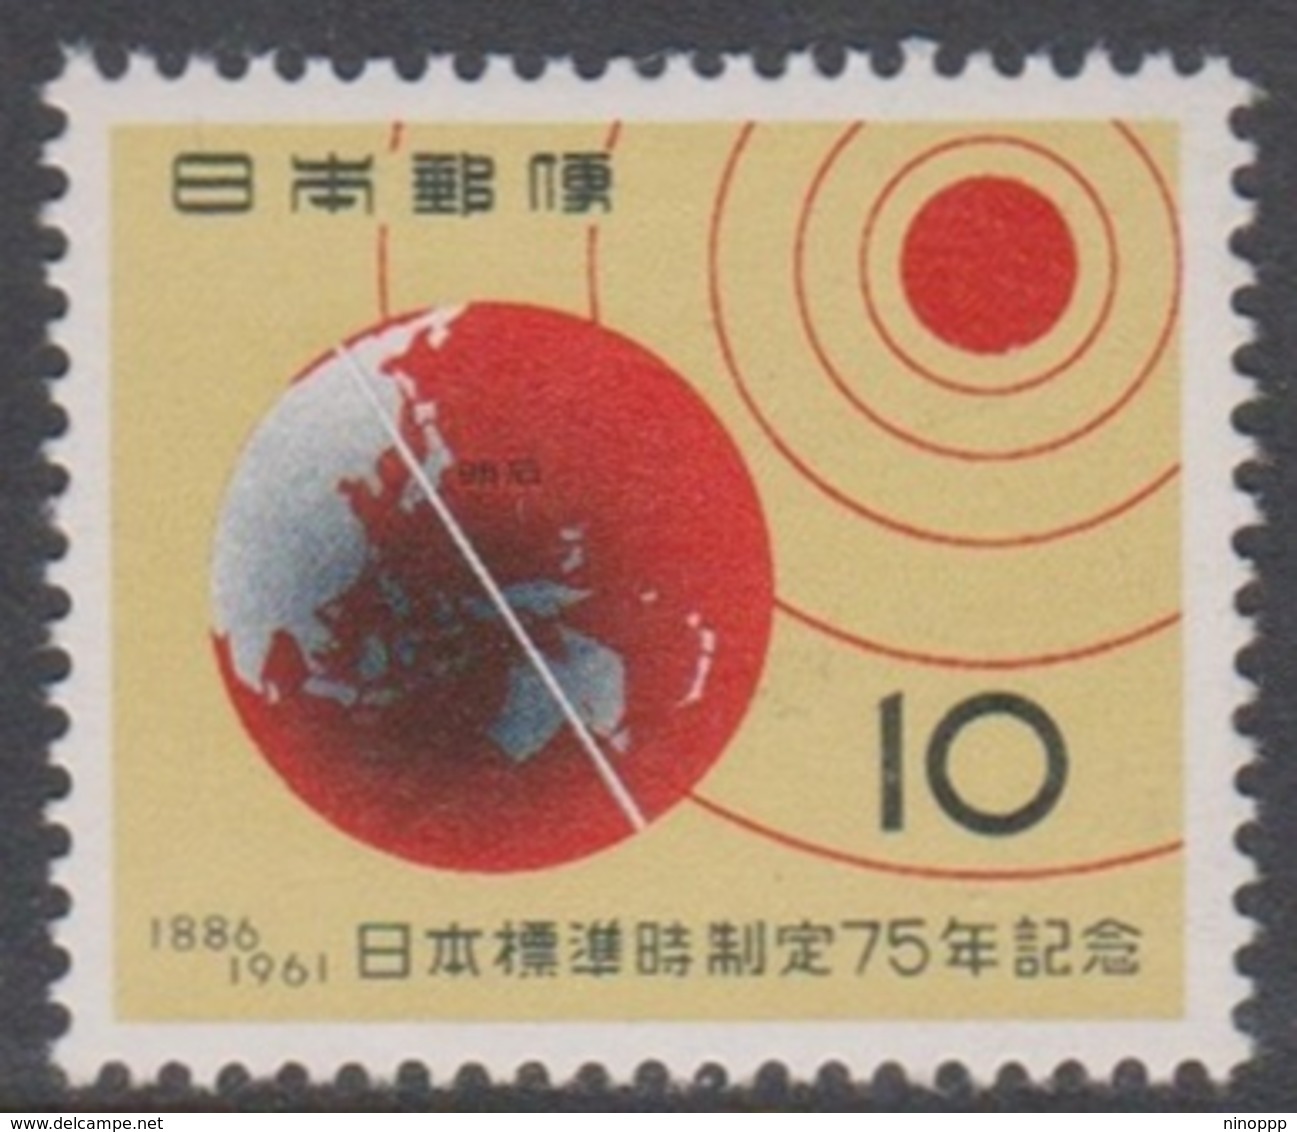 Japan SG873 1961 75th Anniversary Japanese Standard Time, Mint Never Hinged - Unused Stamps